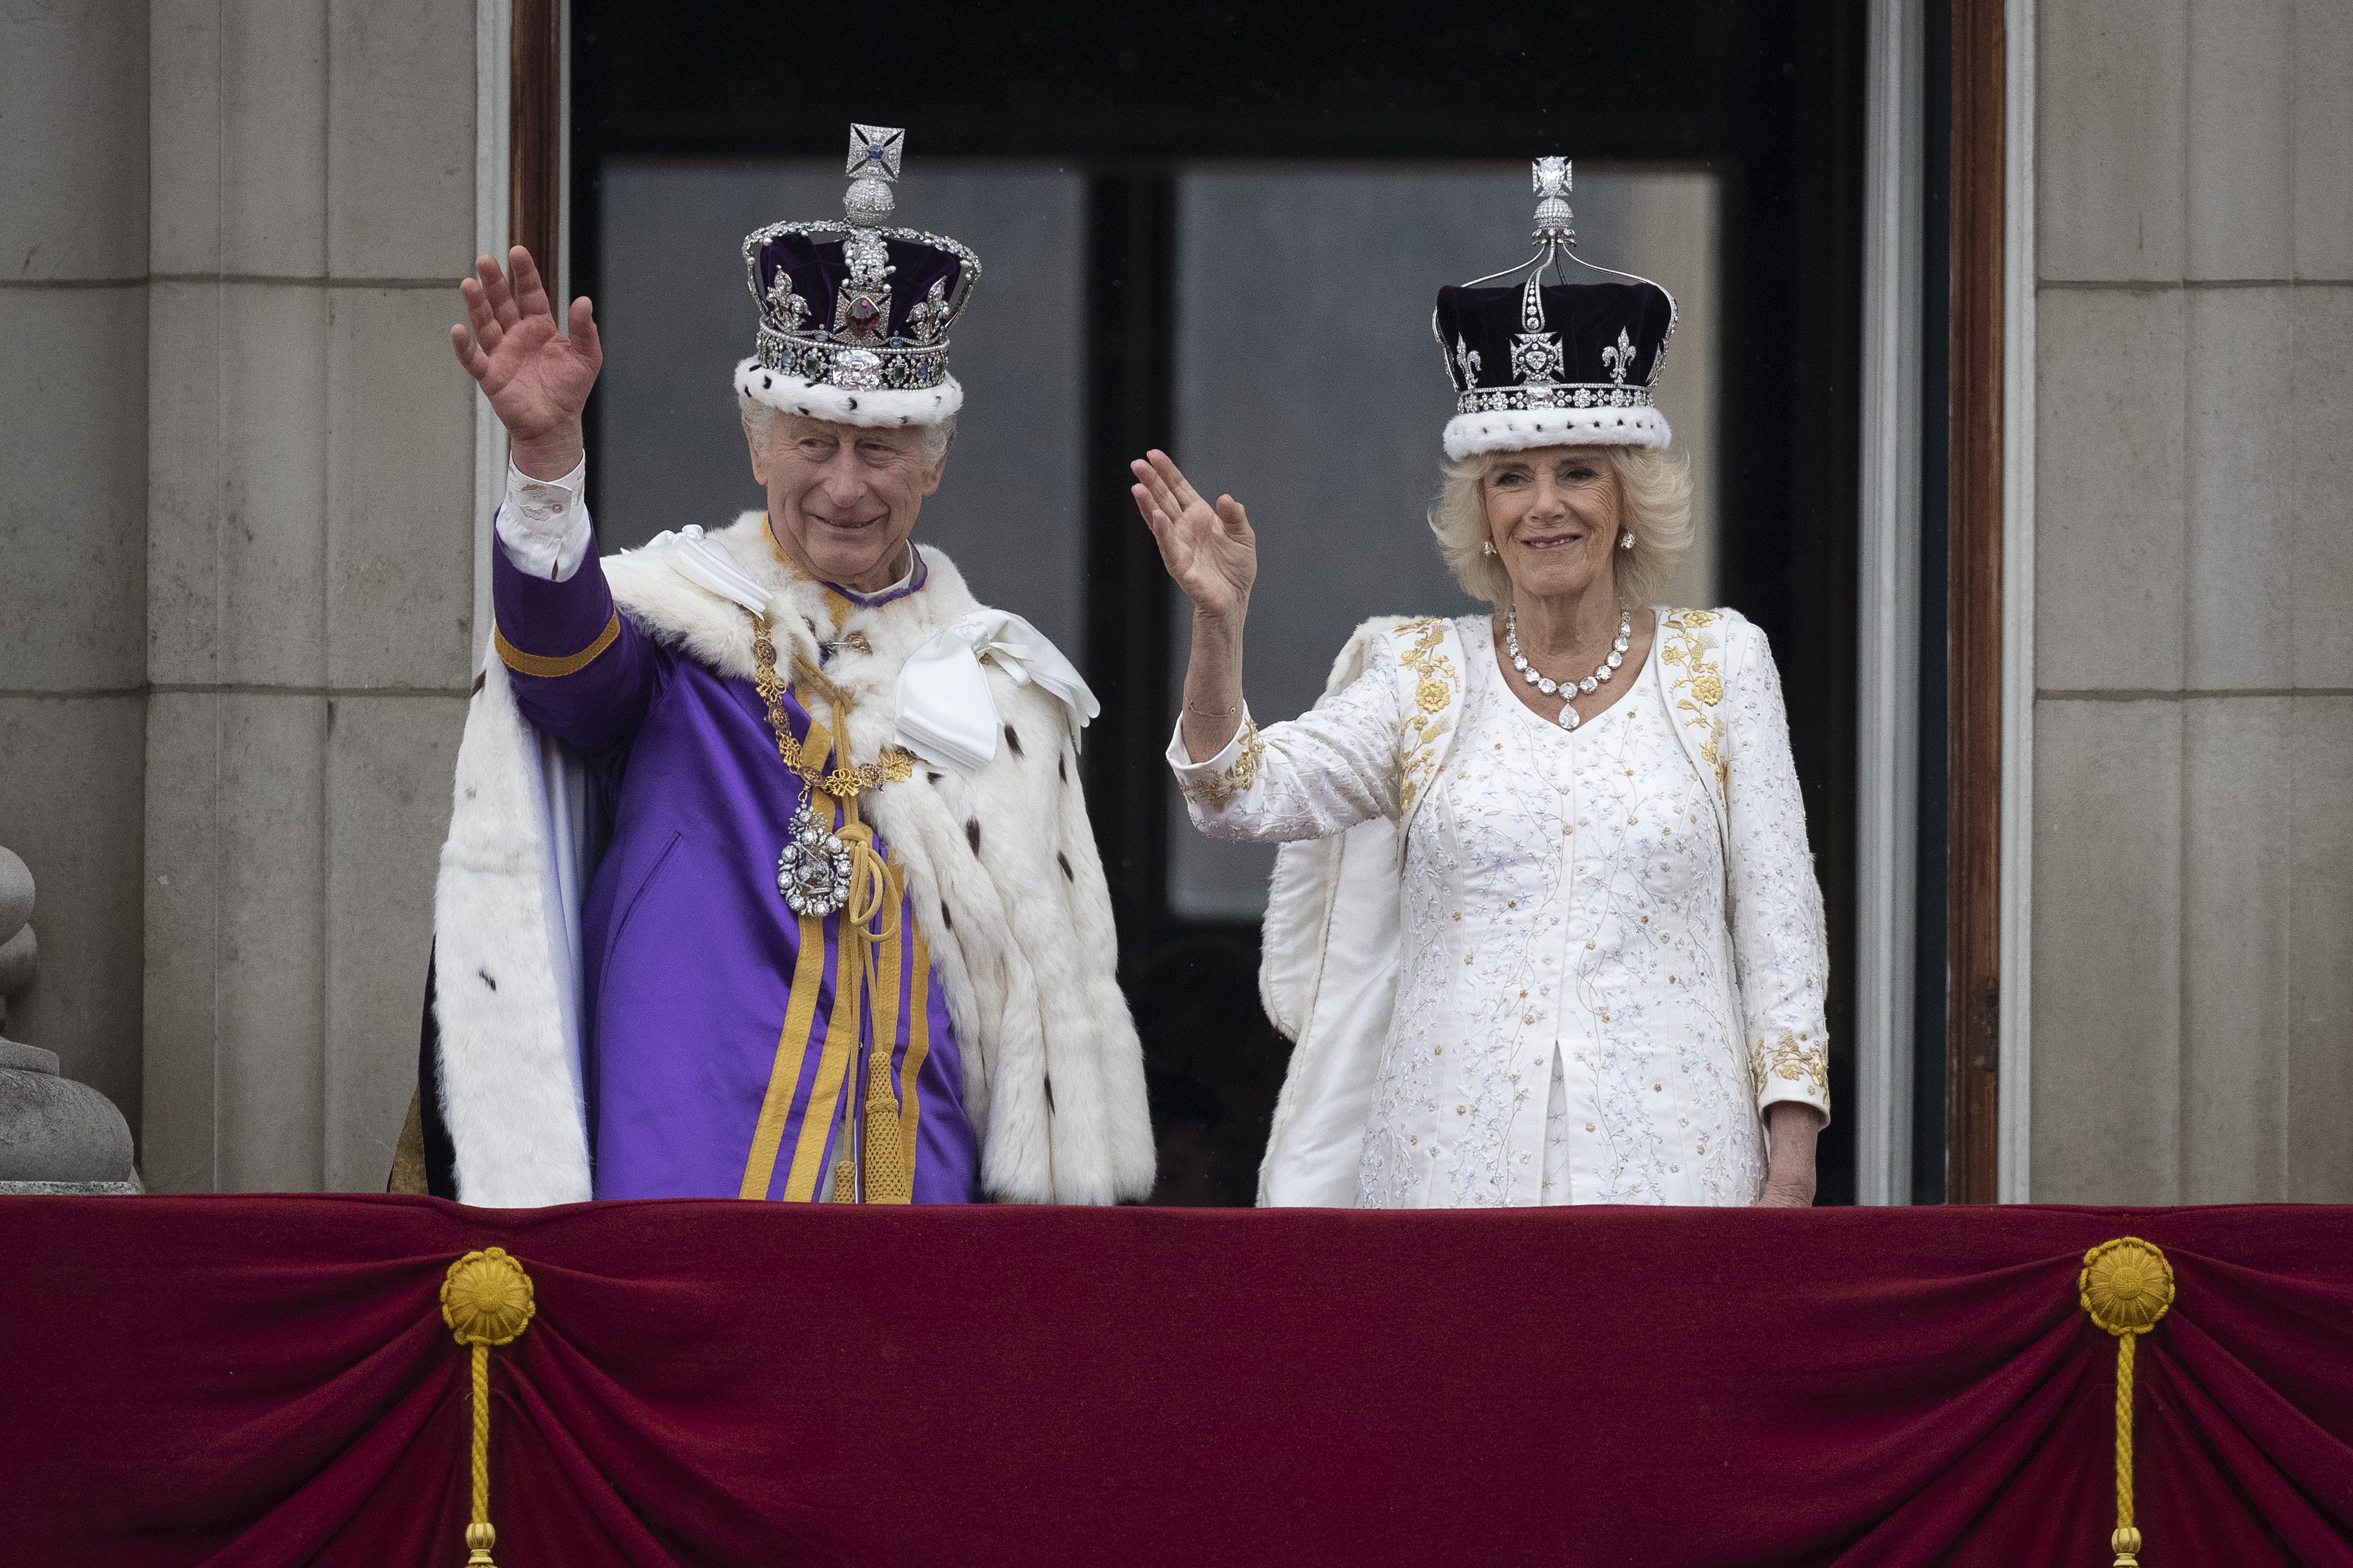 King Charles III  and Queen Camilla on the Buckingham Palace balcony after being crowned during the coronation ceremony on May 6, 2023 in London, England | Source: Getty Images